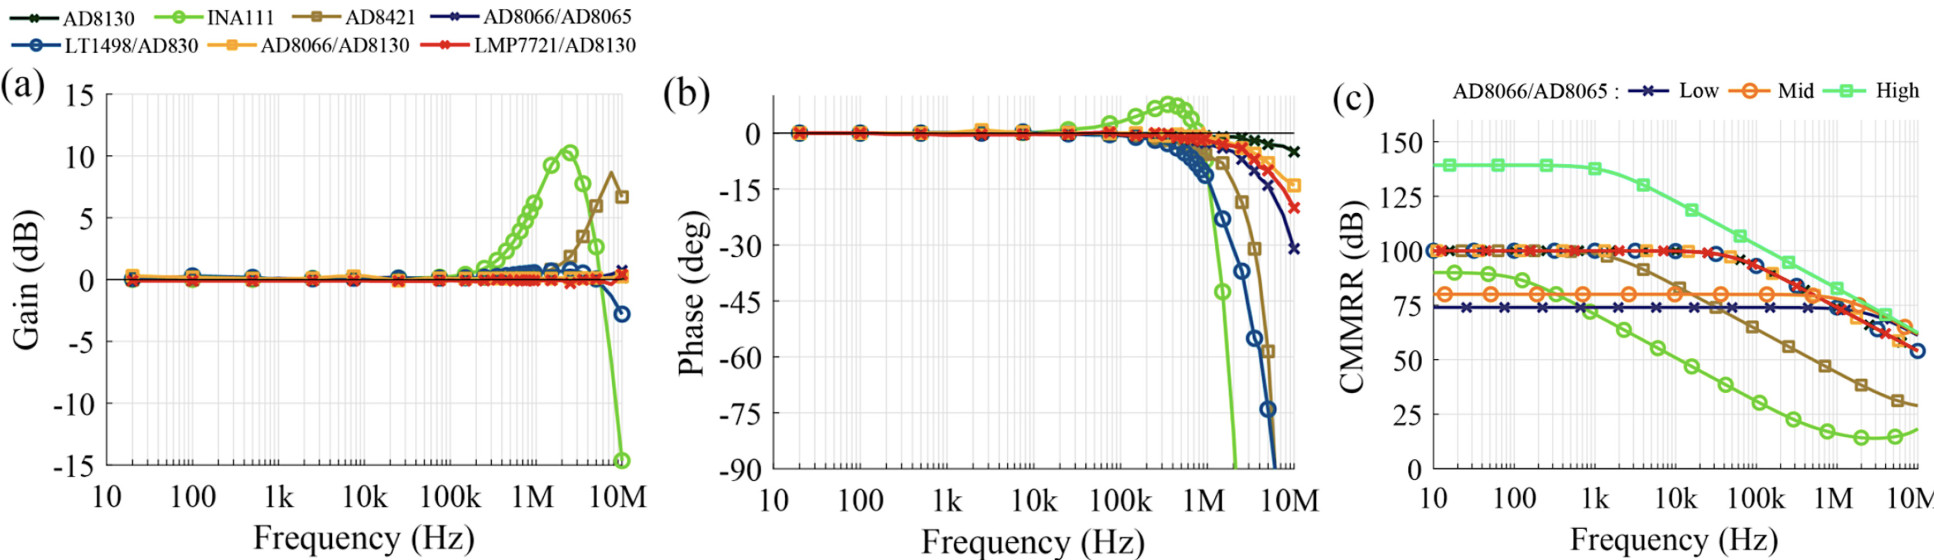 (a) Gain and (b) phase vs. frequency responses of all the examined devices and topologies. (c) LTSpice simulations of the amplifier CMRR.